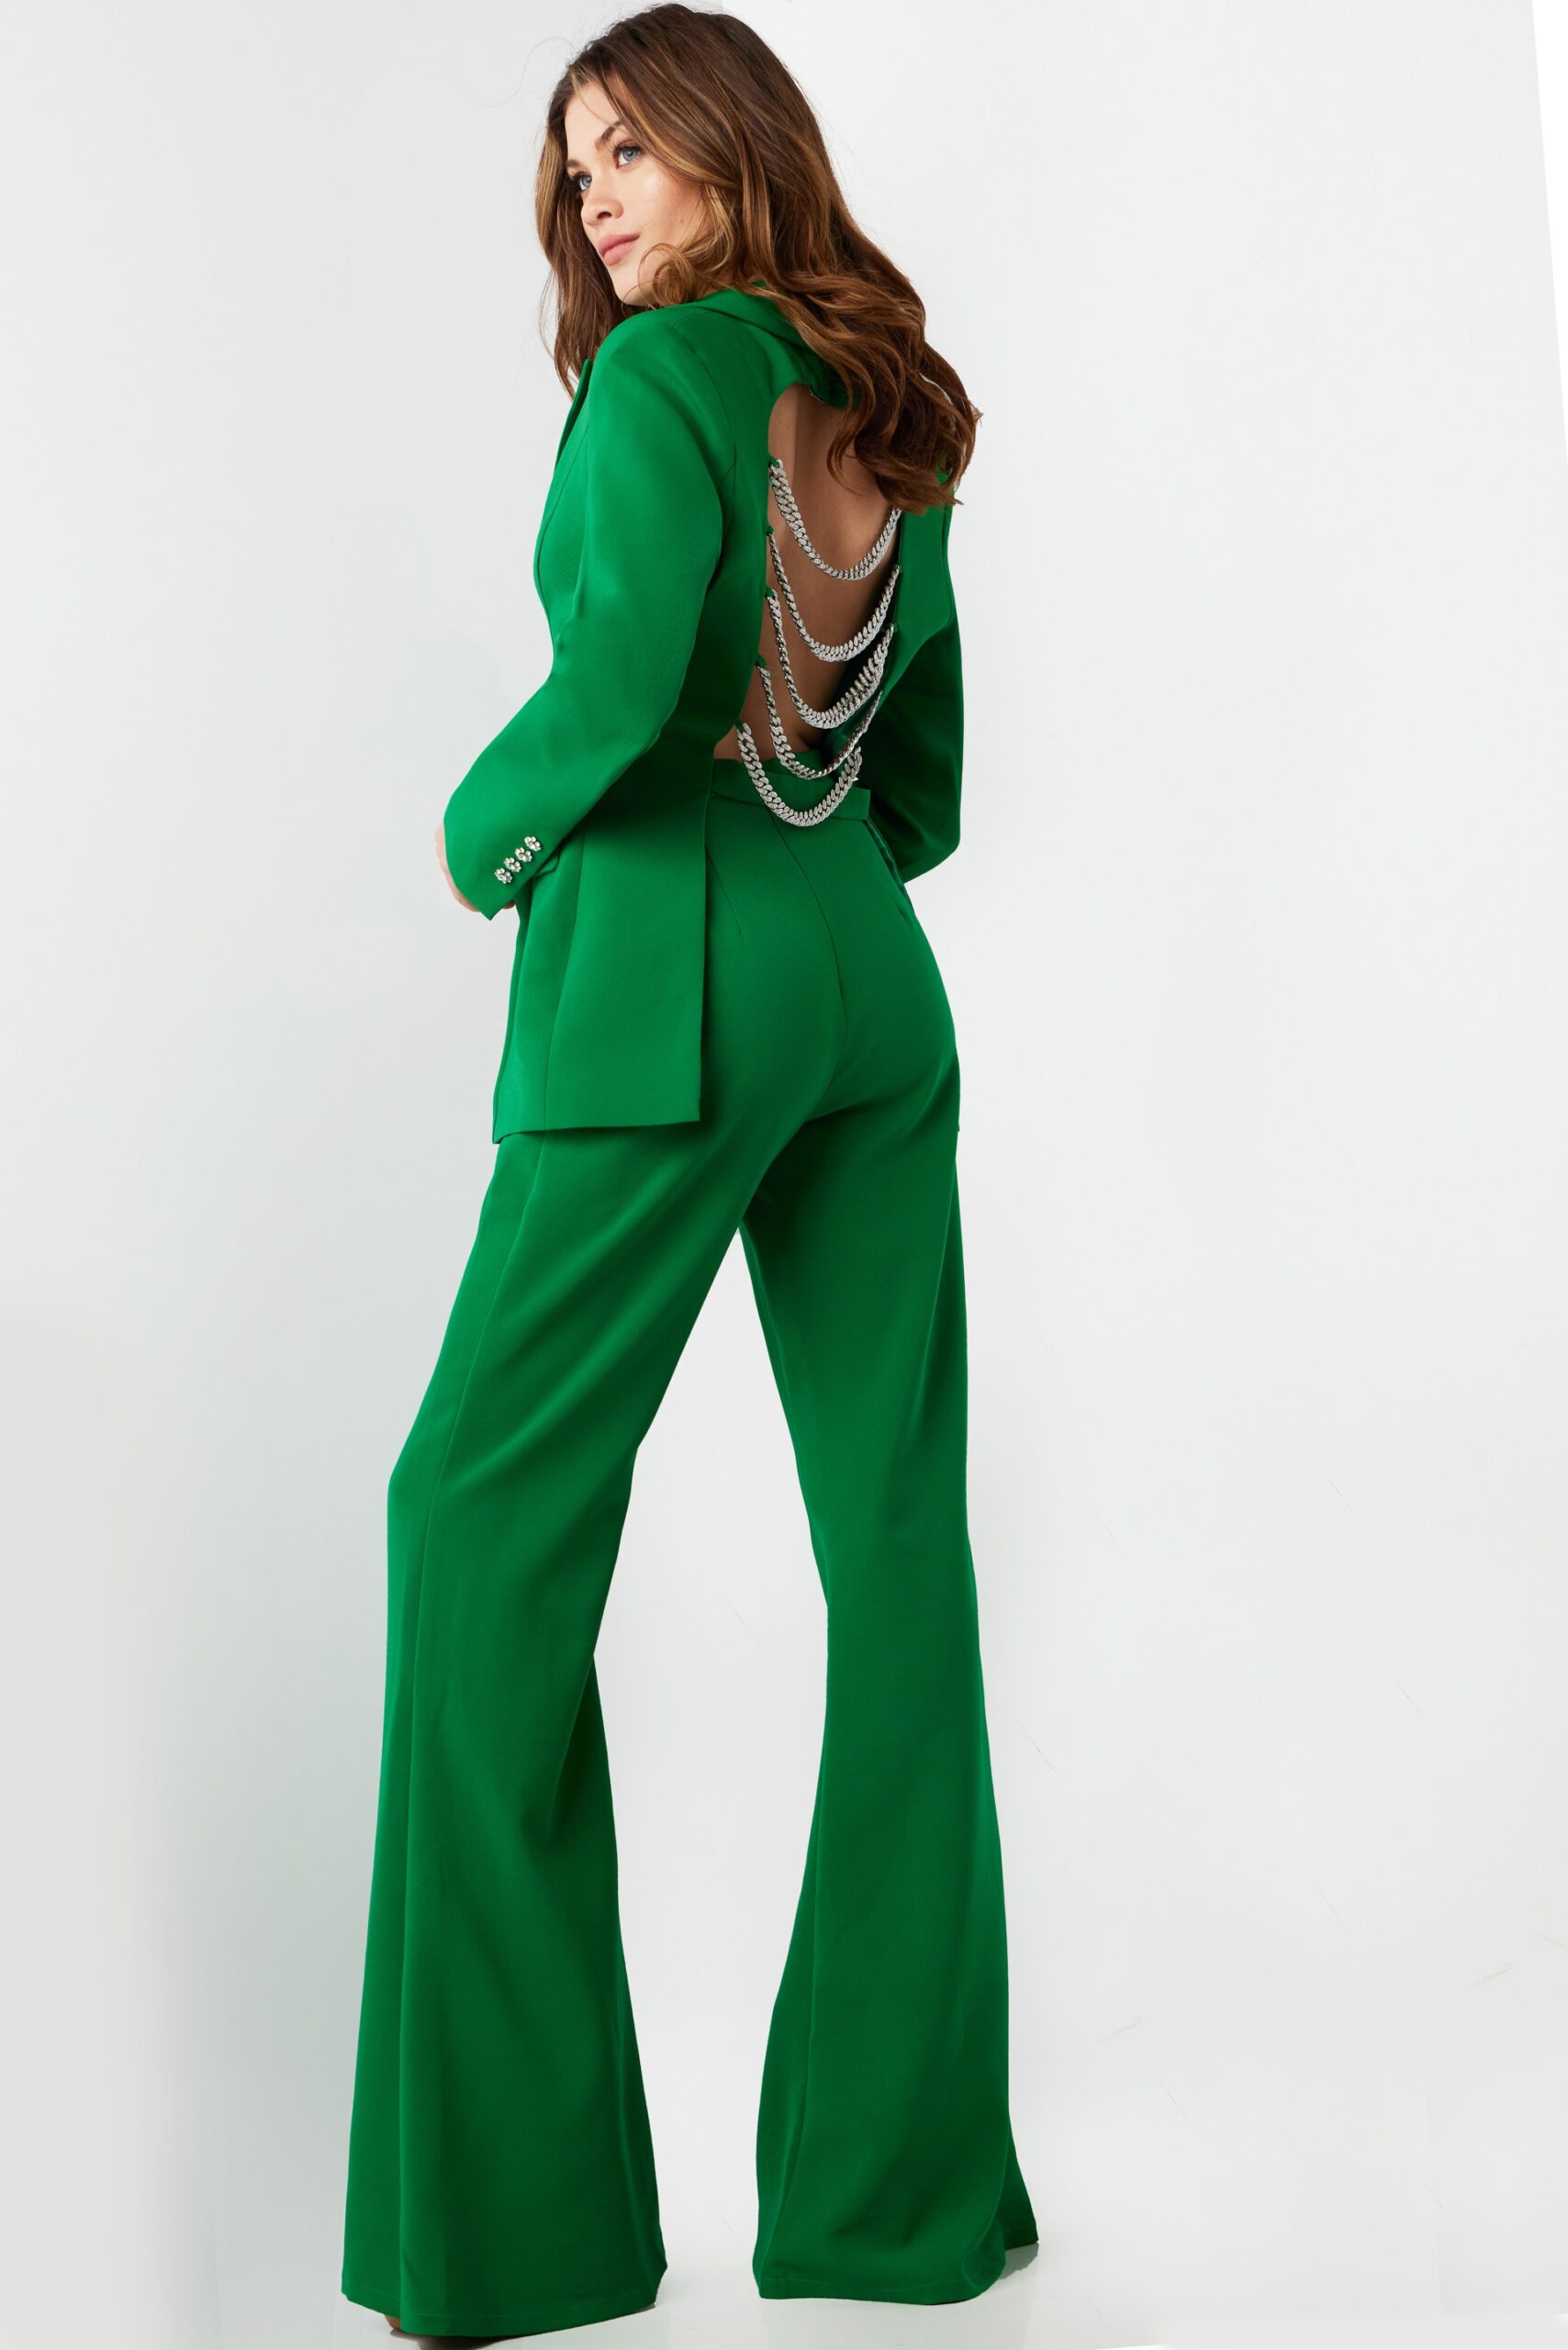 Emerald Two Piece Backless Contemporary Pant Suit 26144